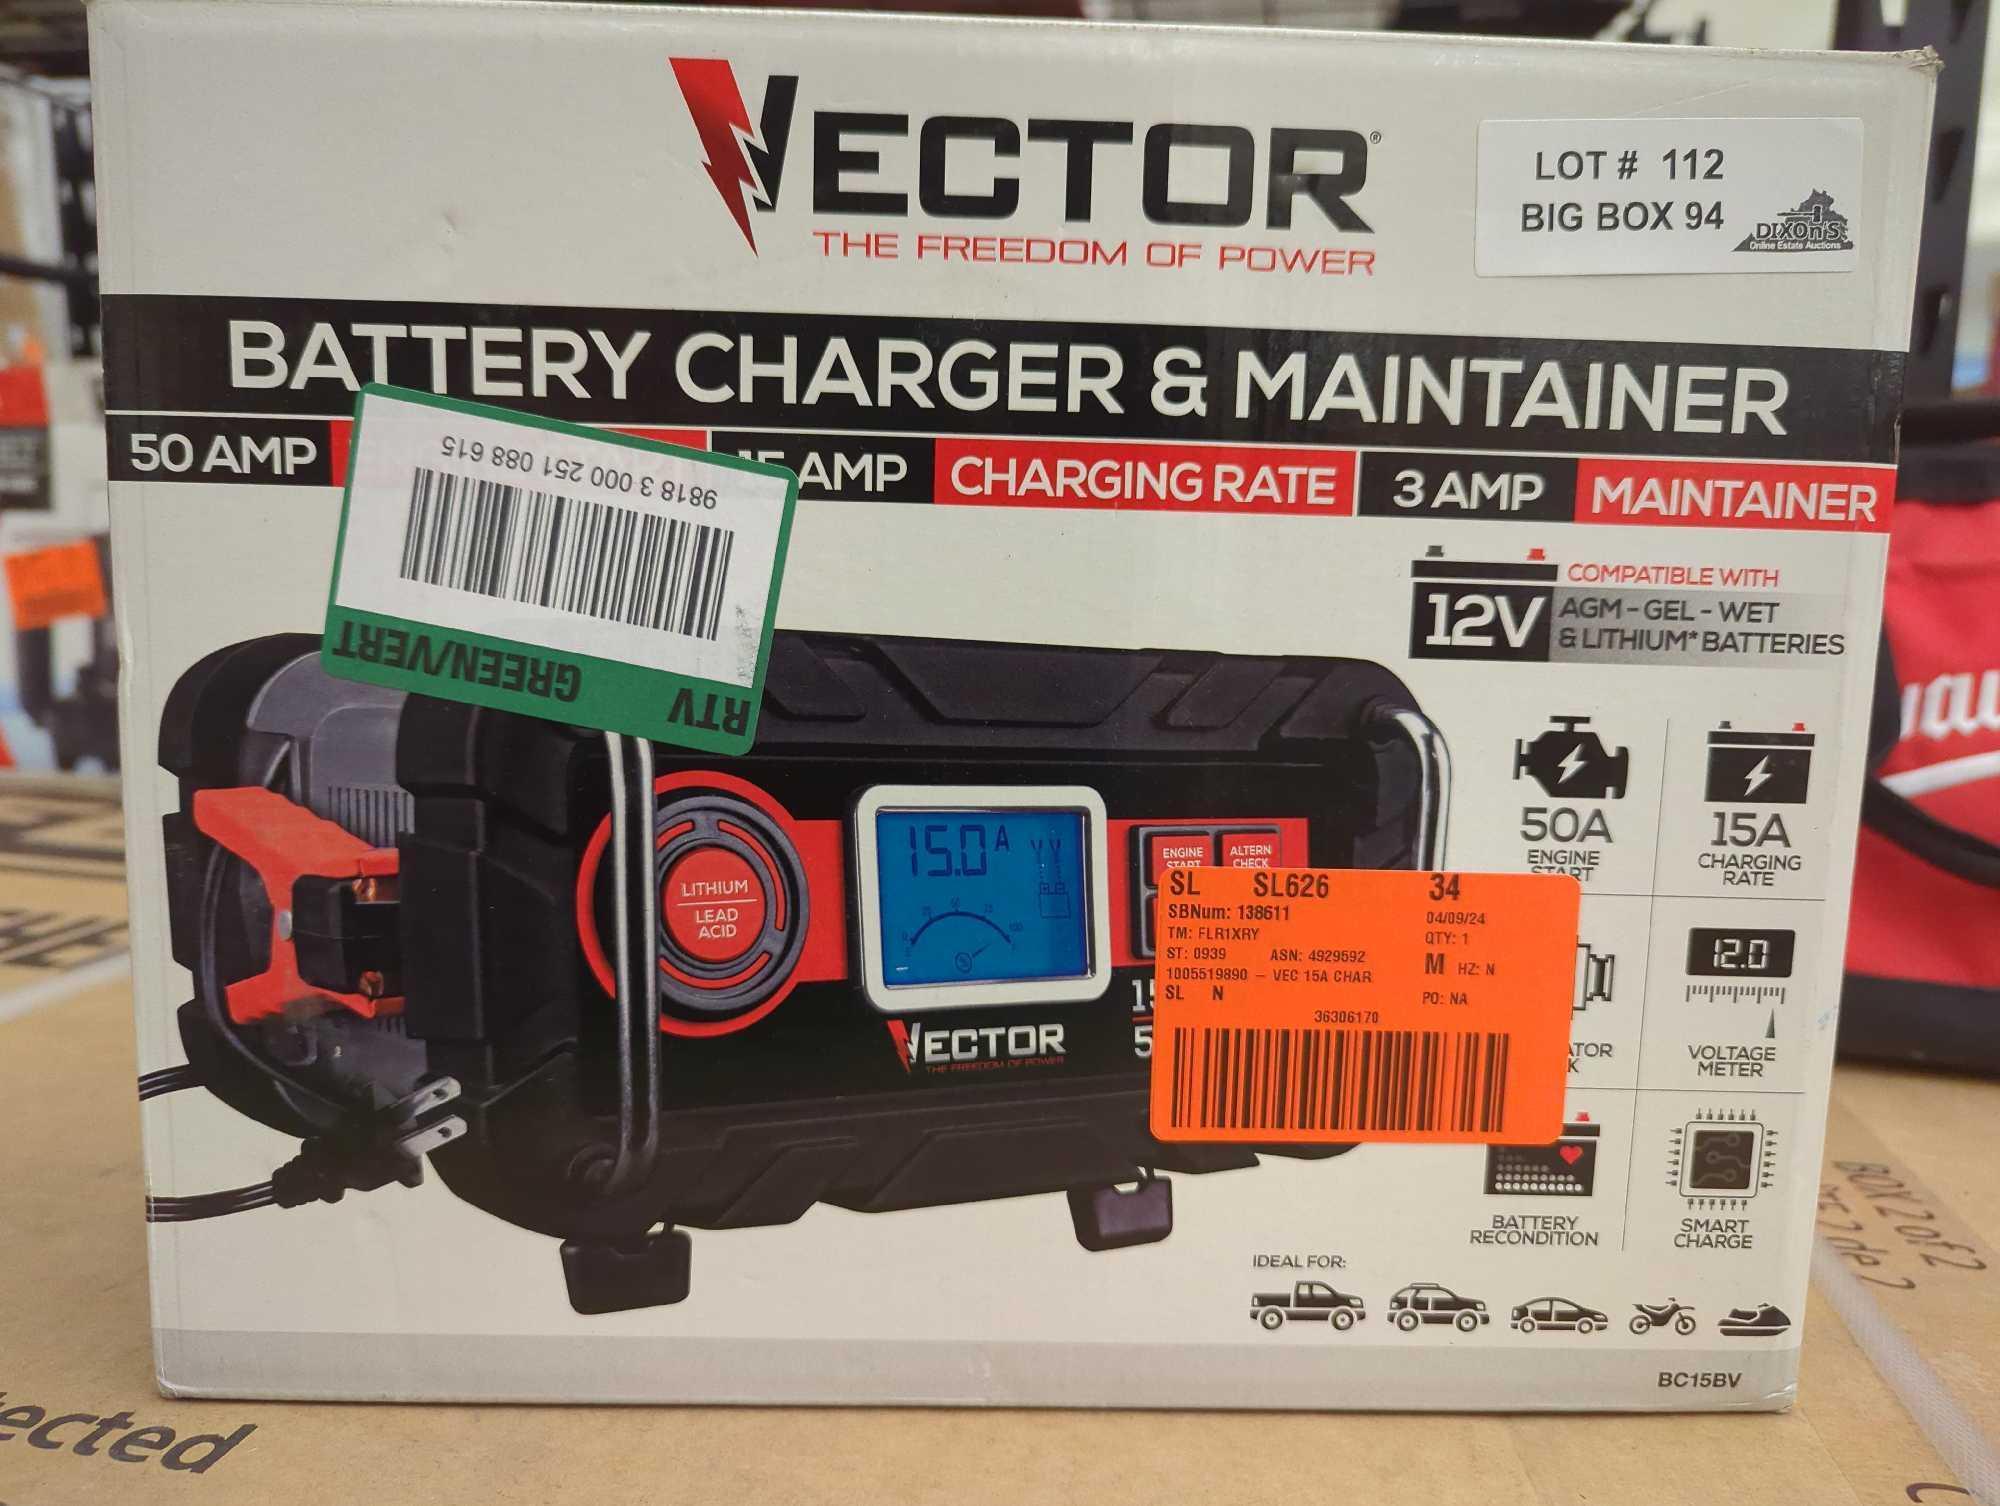 VECTOR 15 Amp Automatic 12V Battery Charger with 50 Amp Engine Start and Alternator Check, Appears